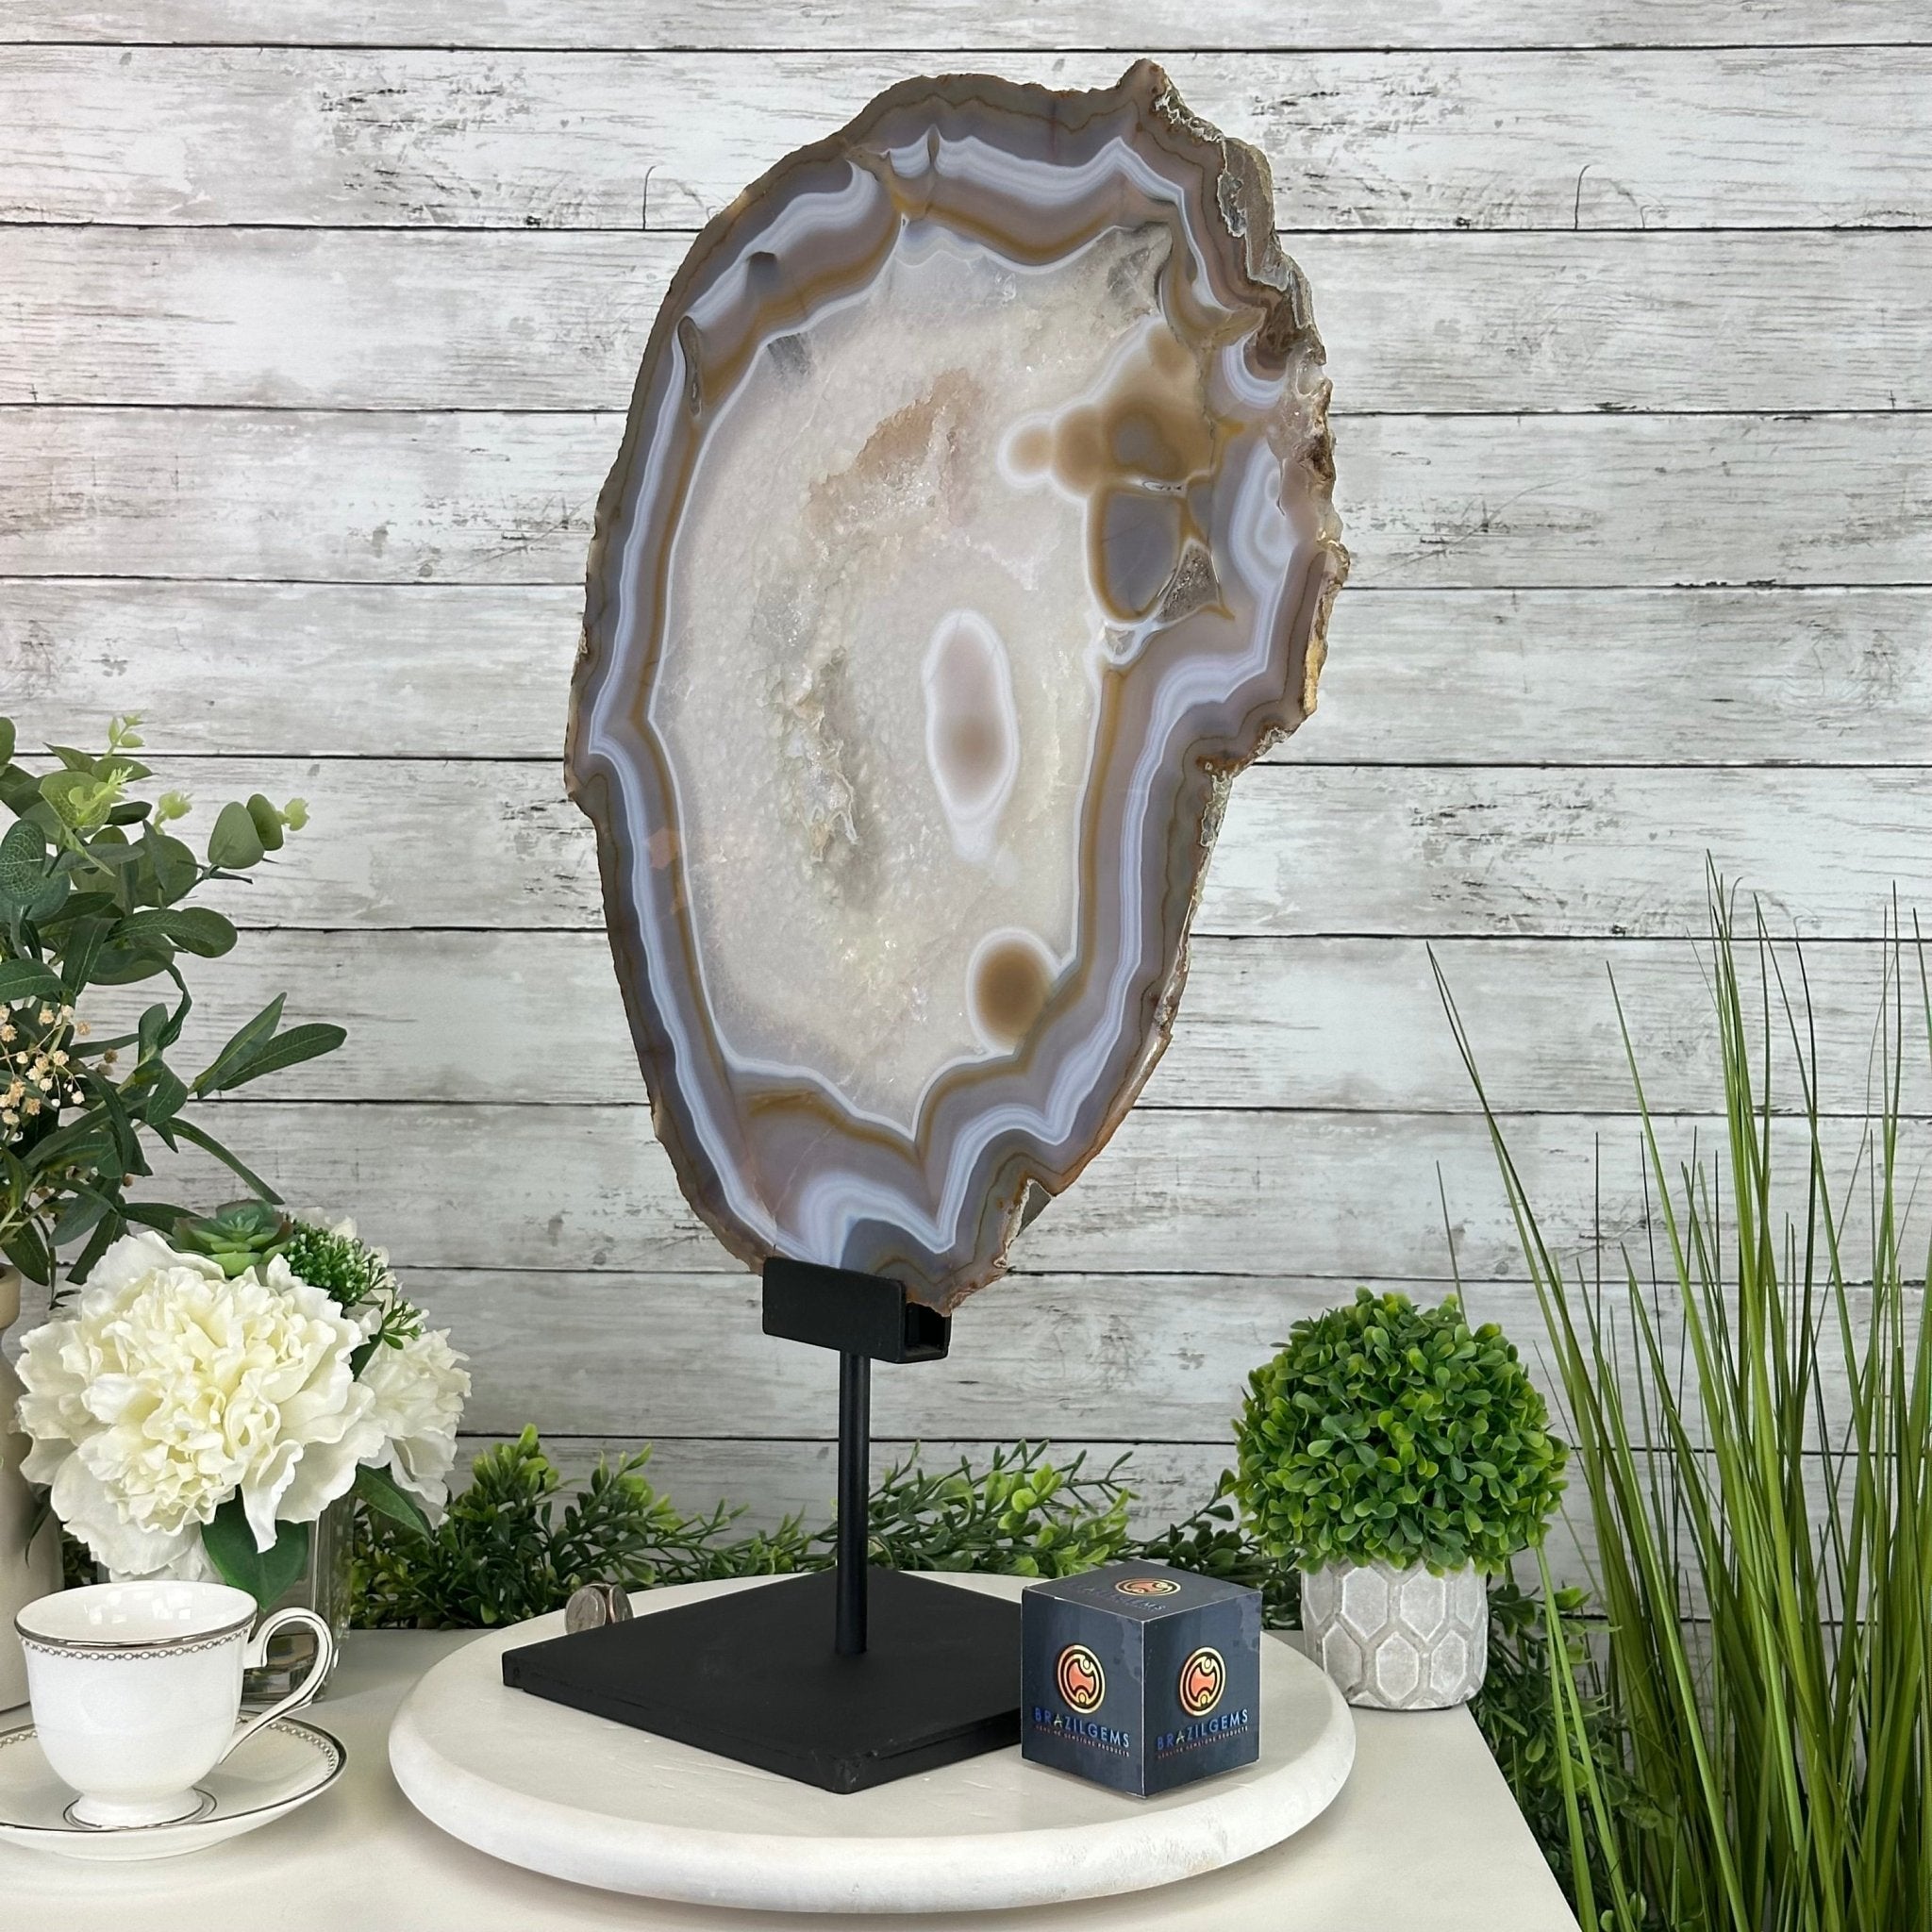 Special Large Natural Brazilian Agate Slice on a Metal Stand, 25" Tall #5056-0041 - Brazil GemsBrazil GemsSpecial Large Natural Brazilian Agate Slice on a Metal Stand, 25" Tall #5056-0041Slices on Fixed Bases5056-0041